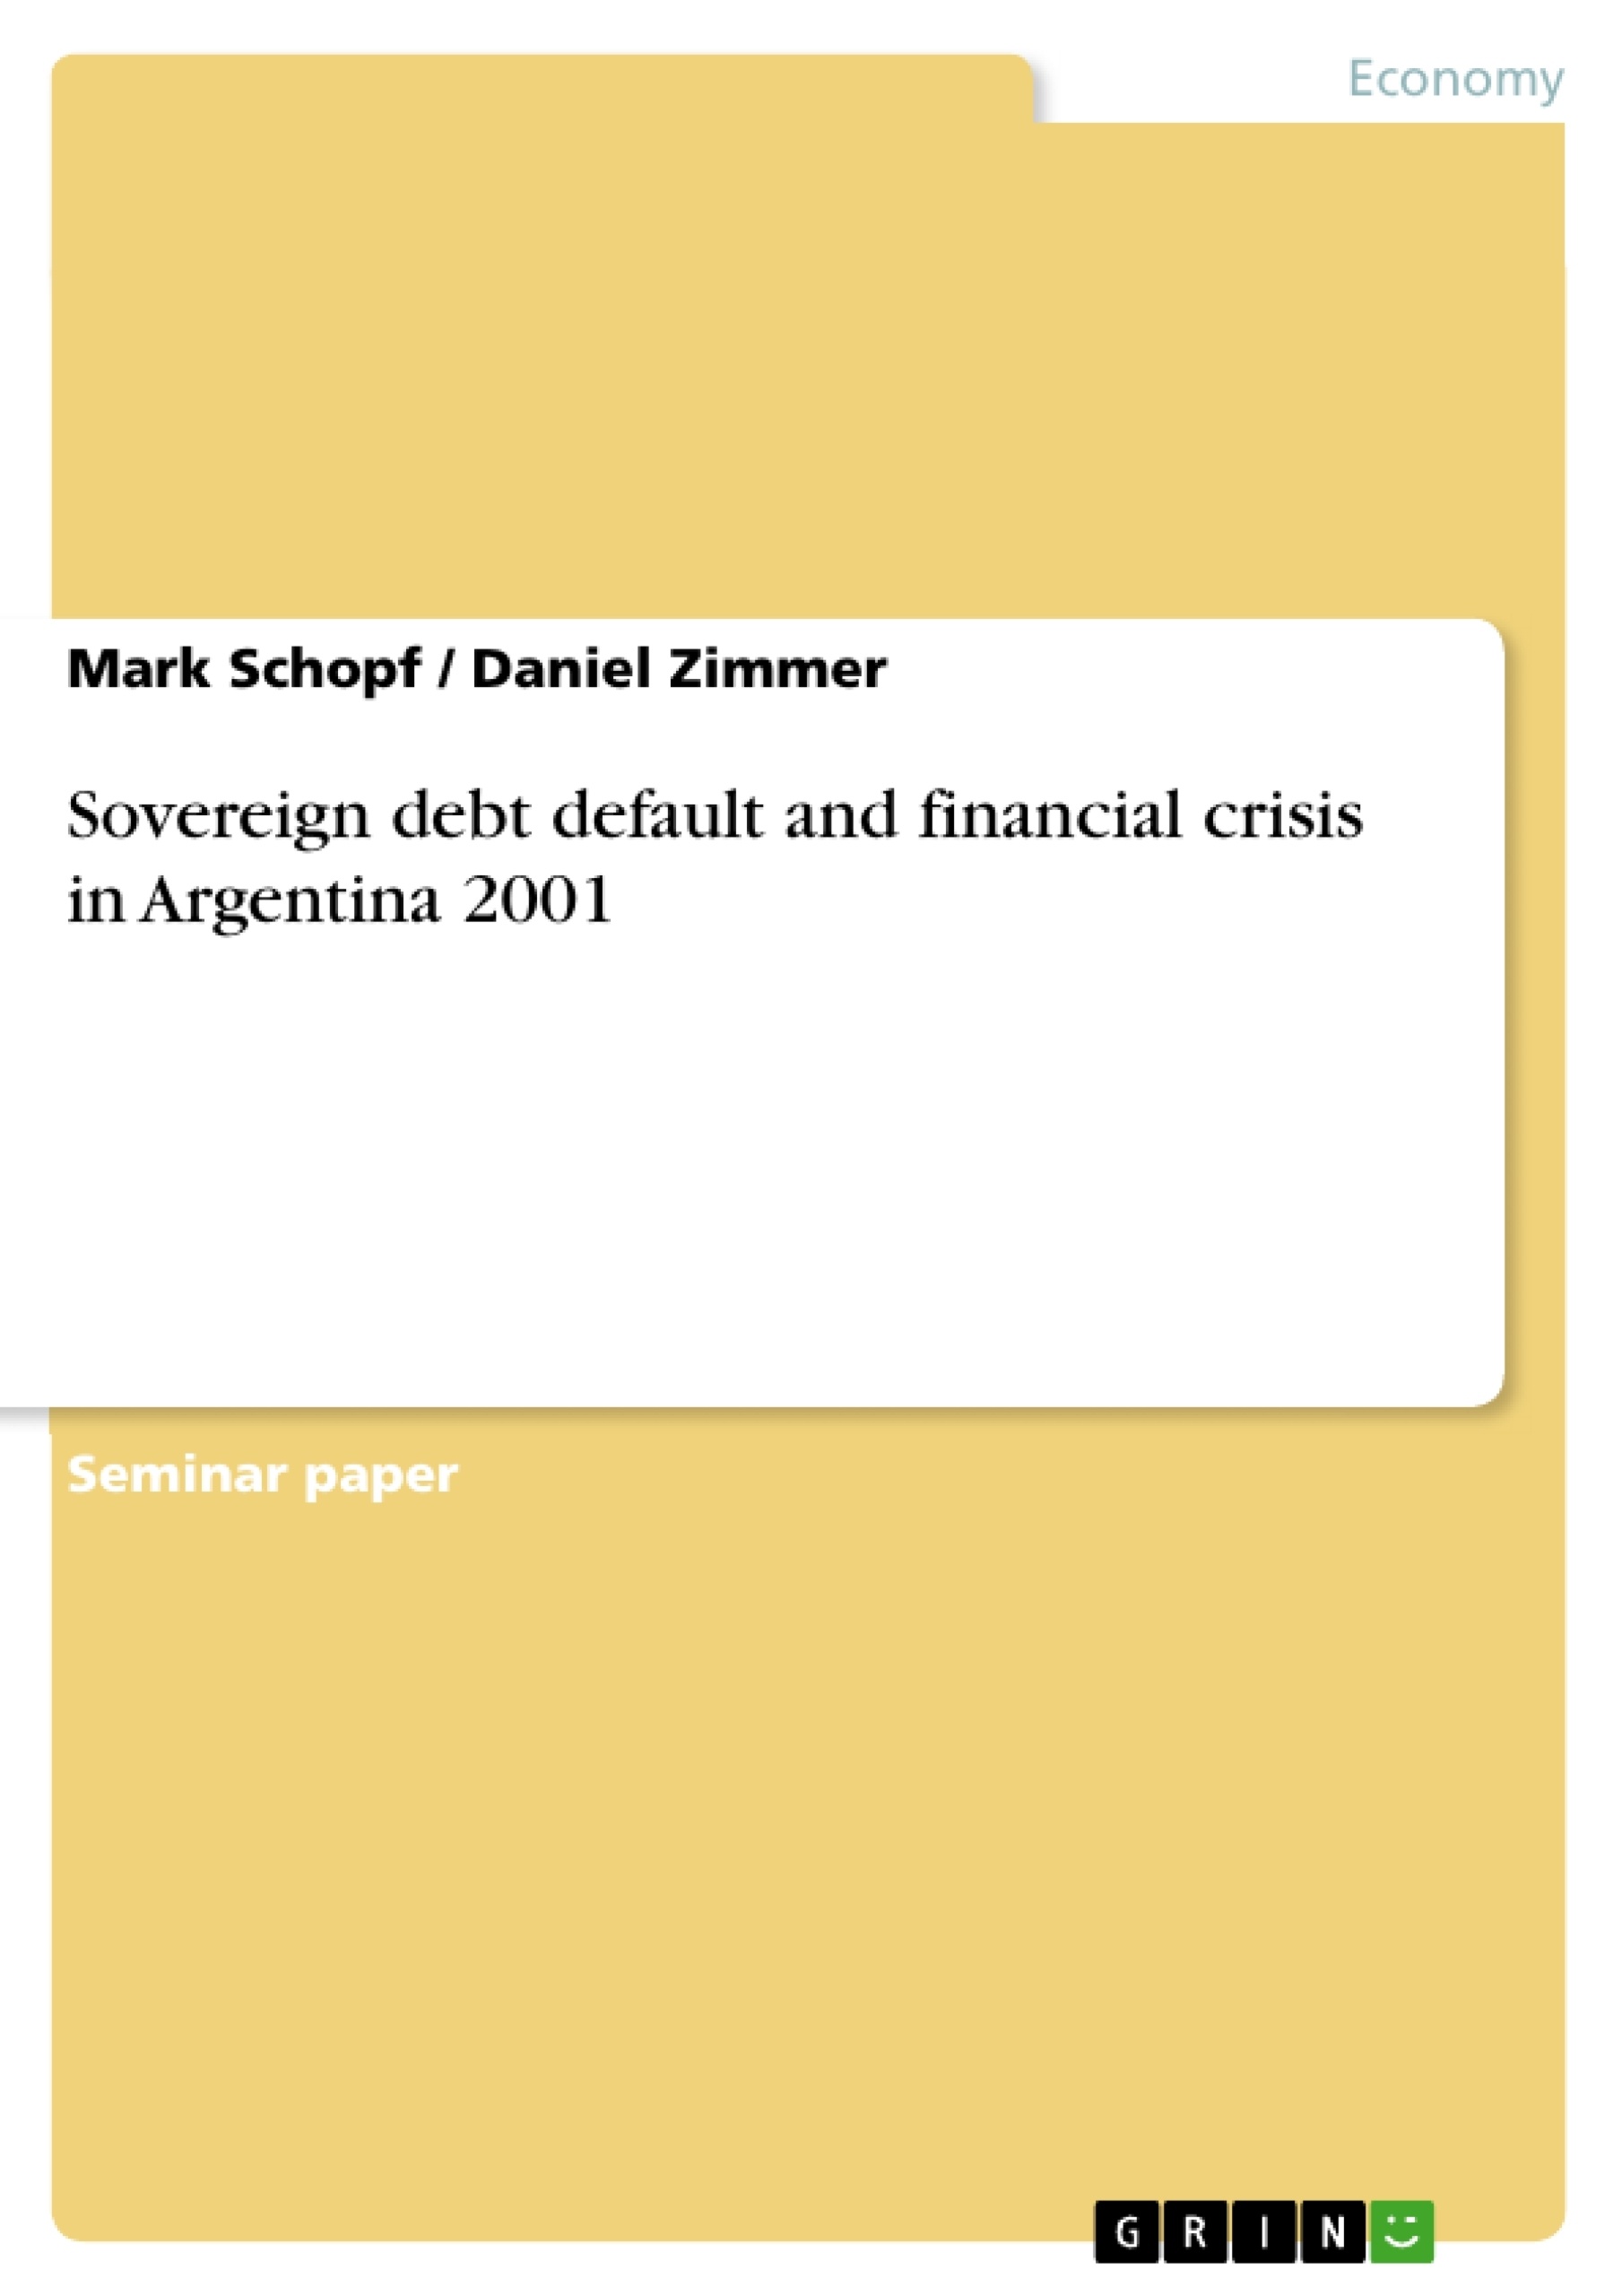 Title: Sovereign debt default and financial crisis in Argentina 2001